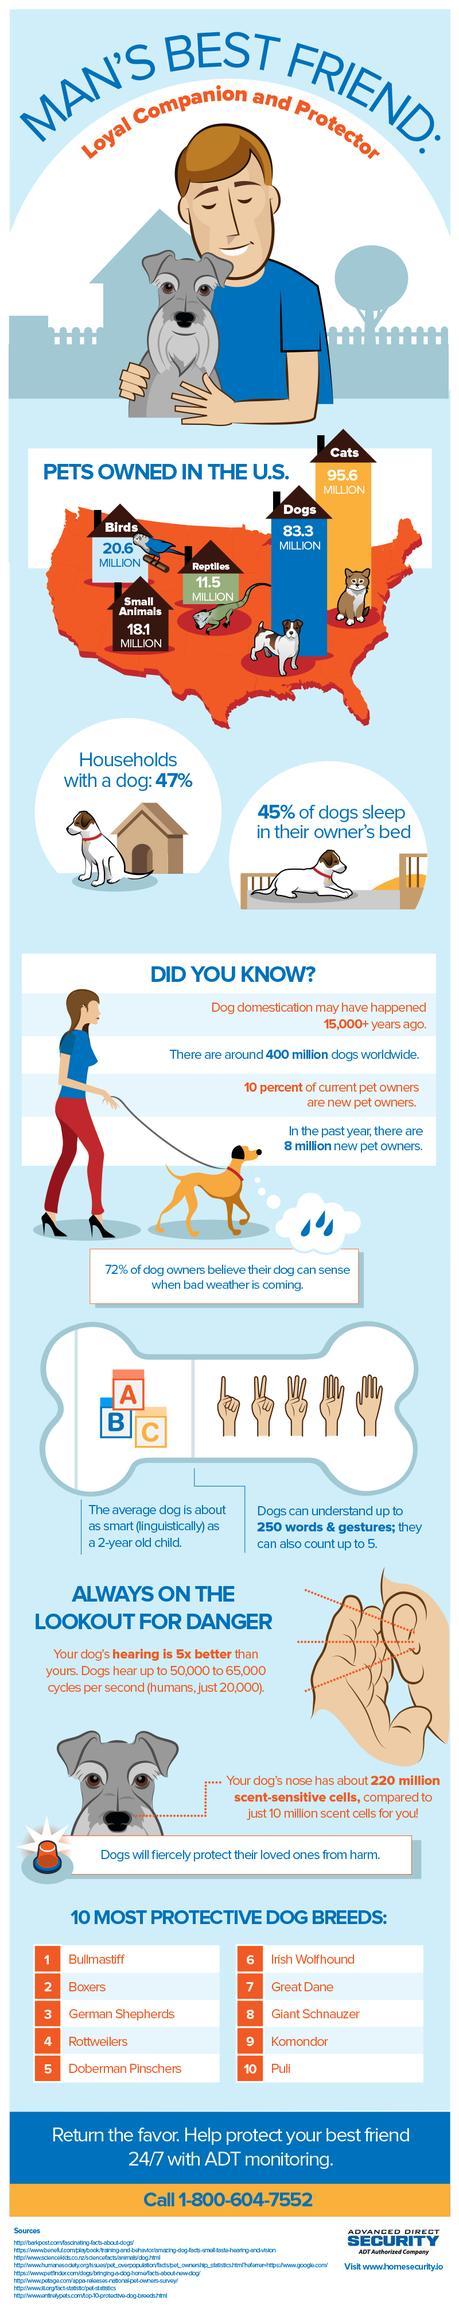 All About Dogs: Facts & Figures Infographic